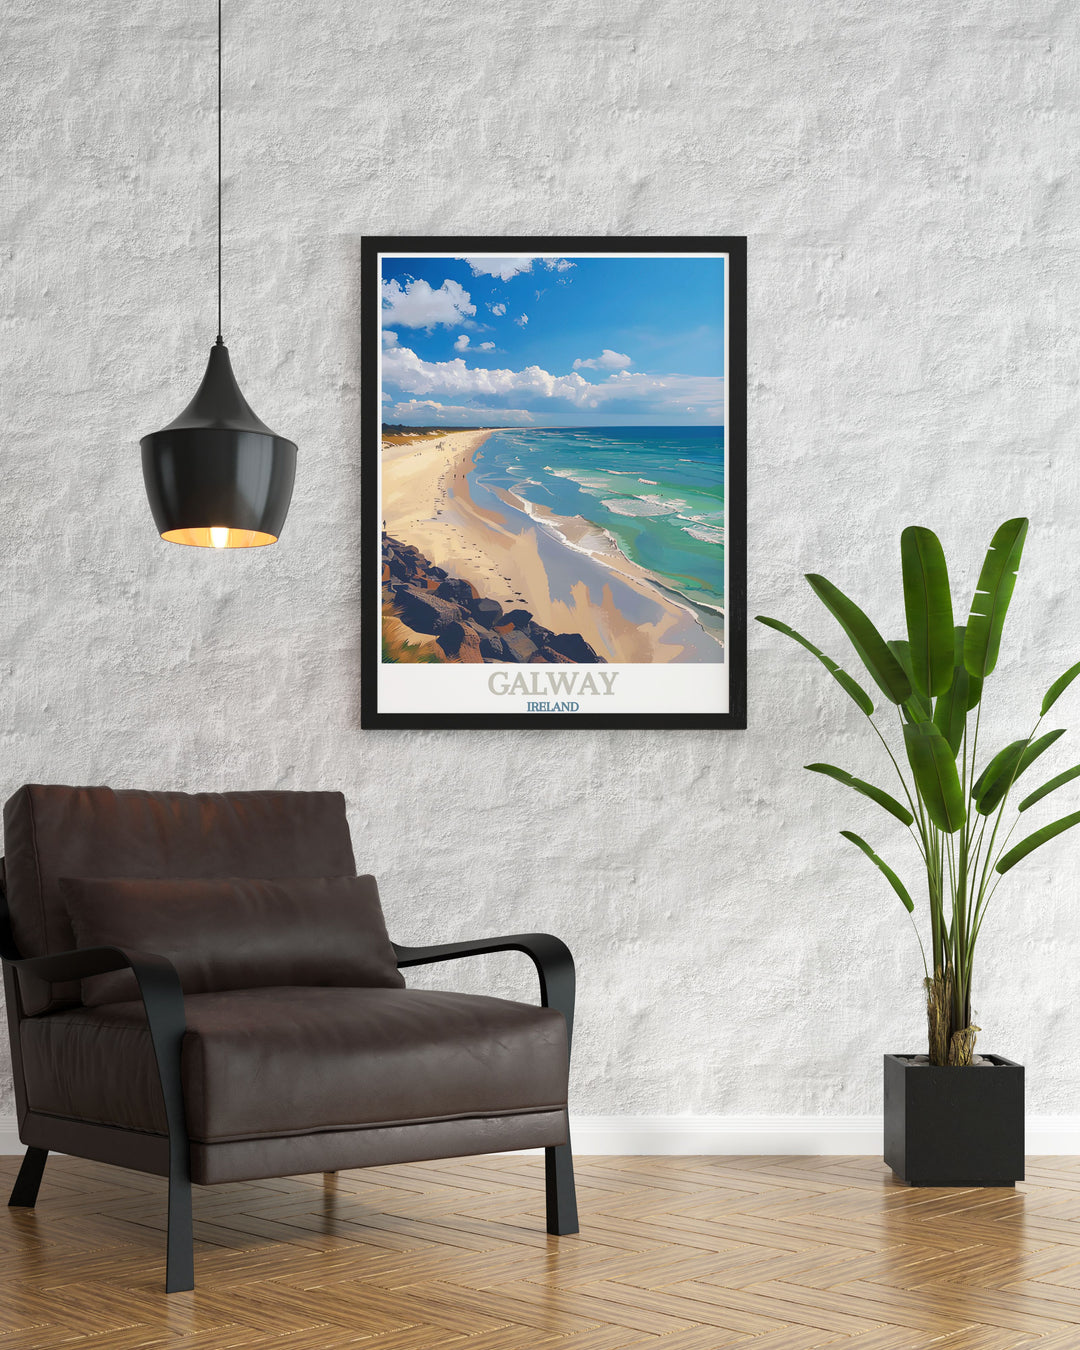 Home decor print illustrating the scenic beauty of Silverstrand Beach, showcasing the golden sands and crystal clear waters, ideal for bringing a touch of coastal serenity into any space.